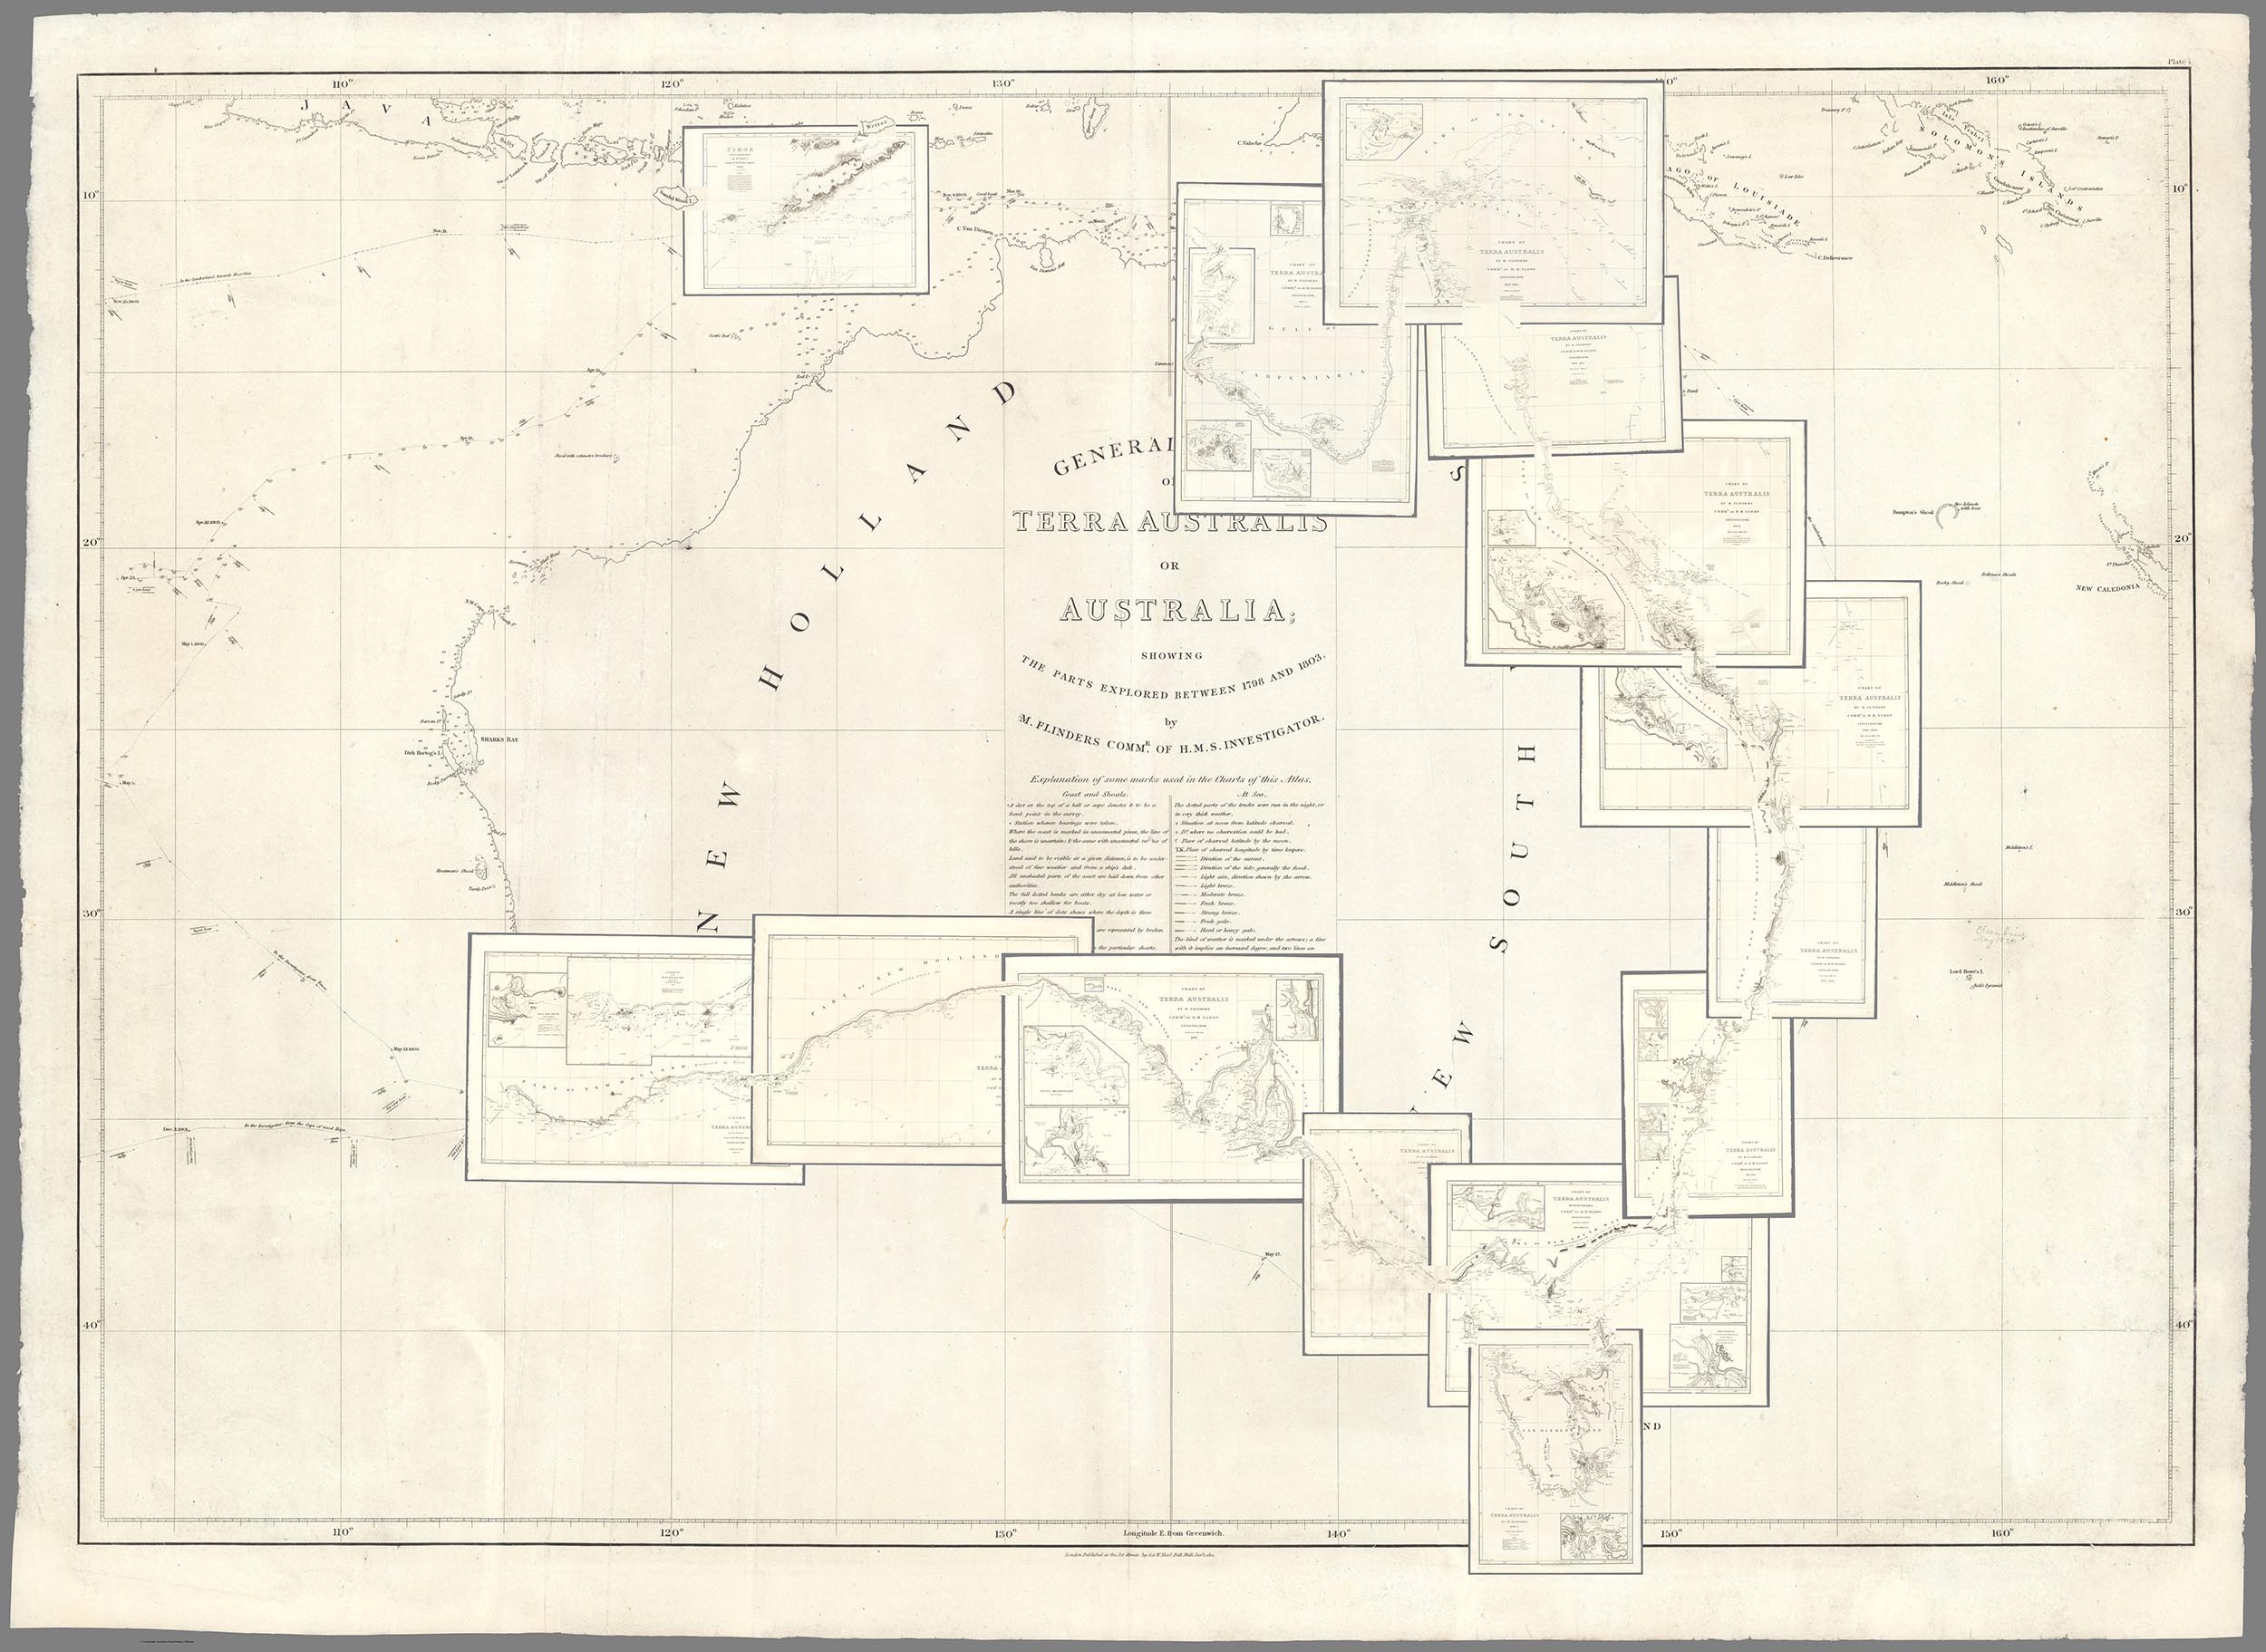 David Rumsey Historical Map Collection | Categories